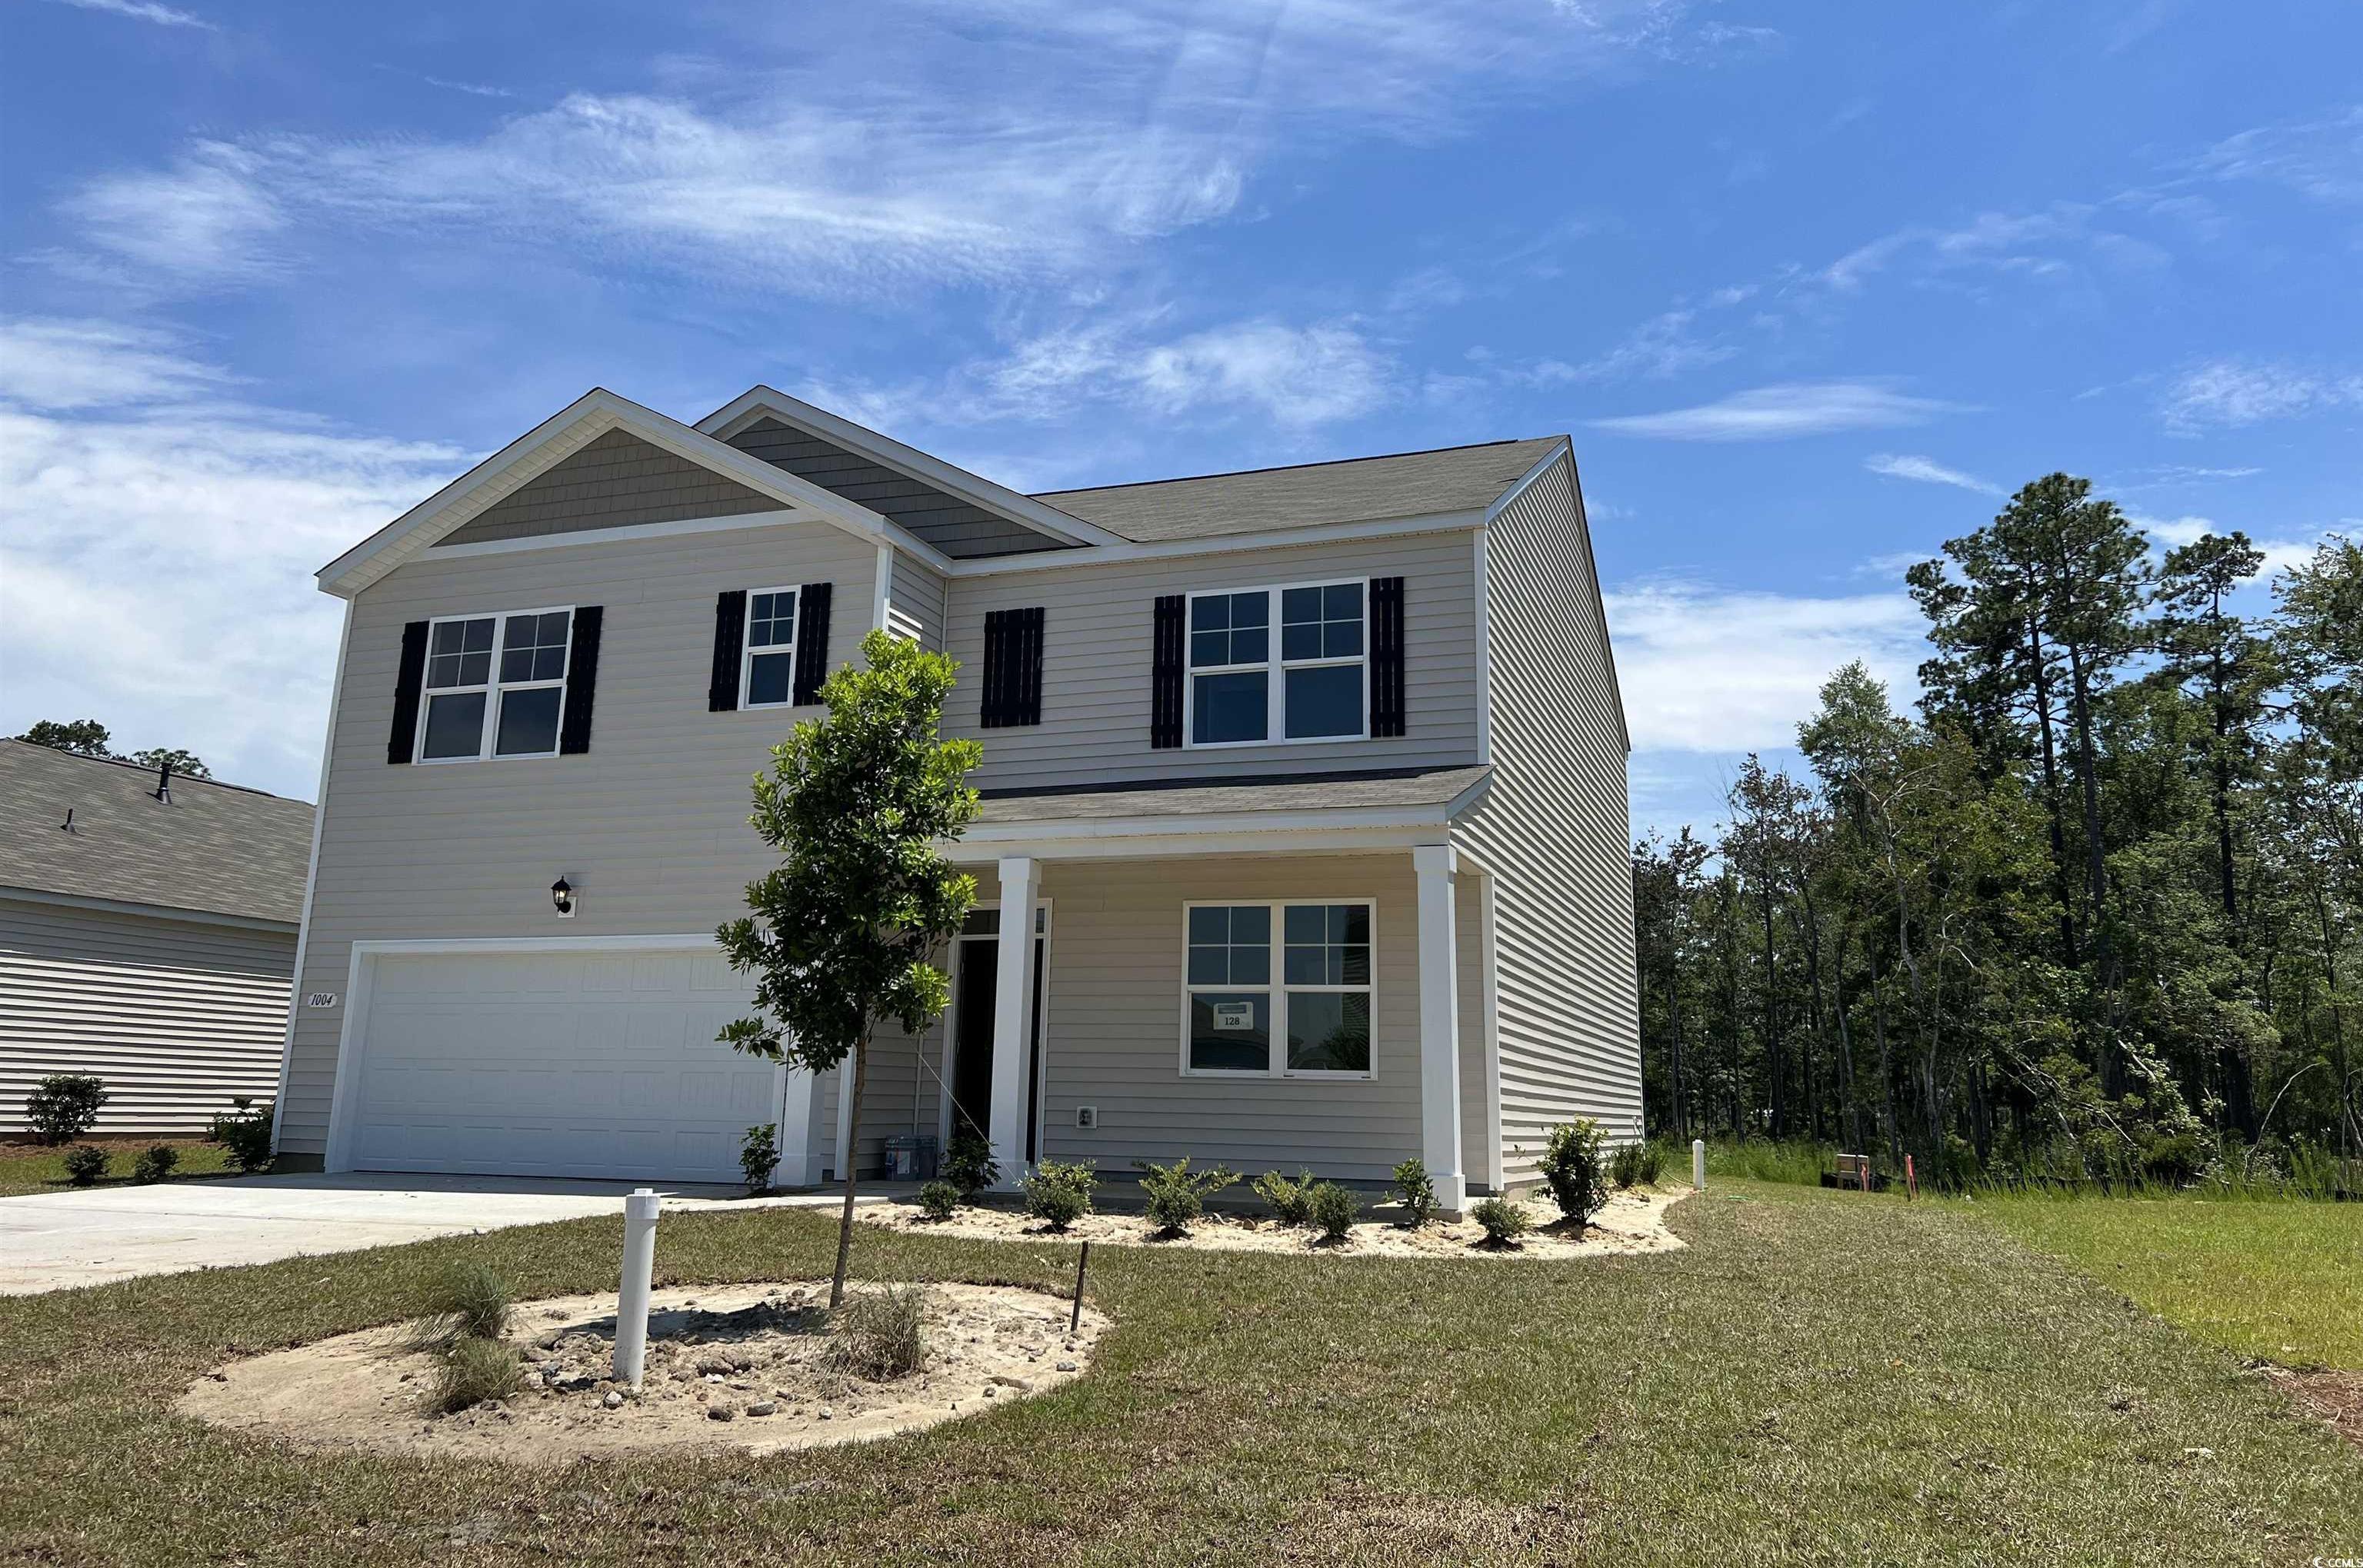 Photo one of 4030 Pearl Tabby Dr. Myrtle Beach SC 29588 | MLS 2403706